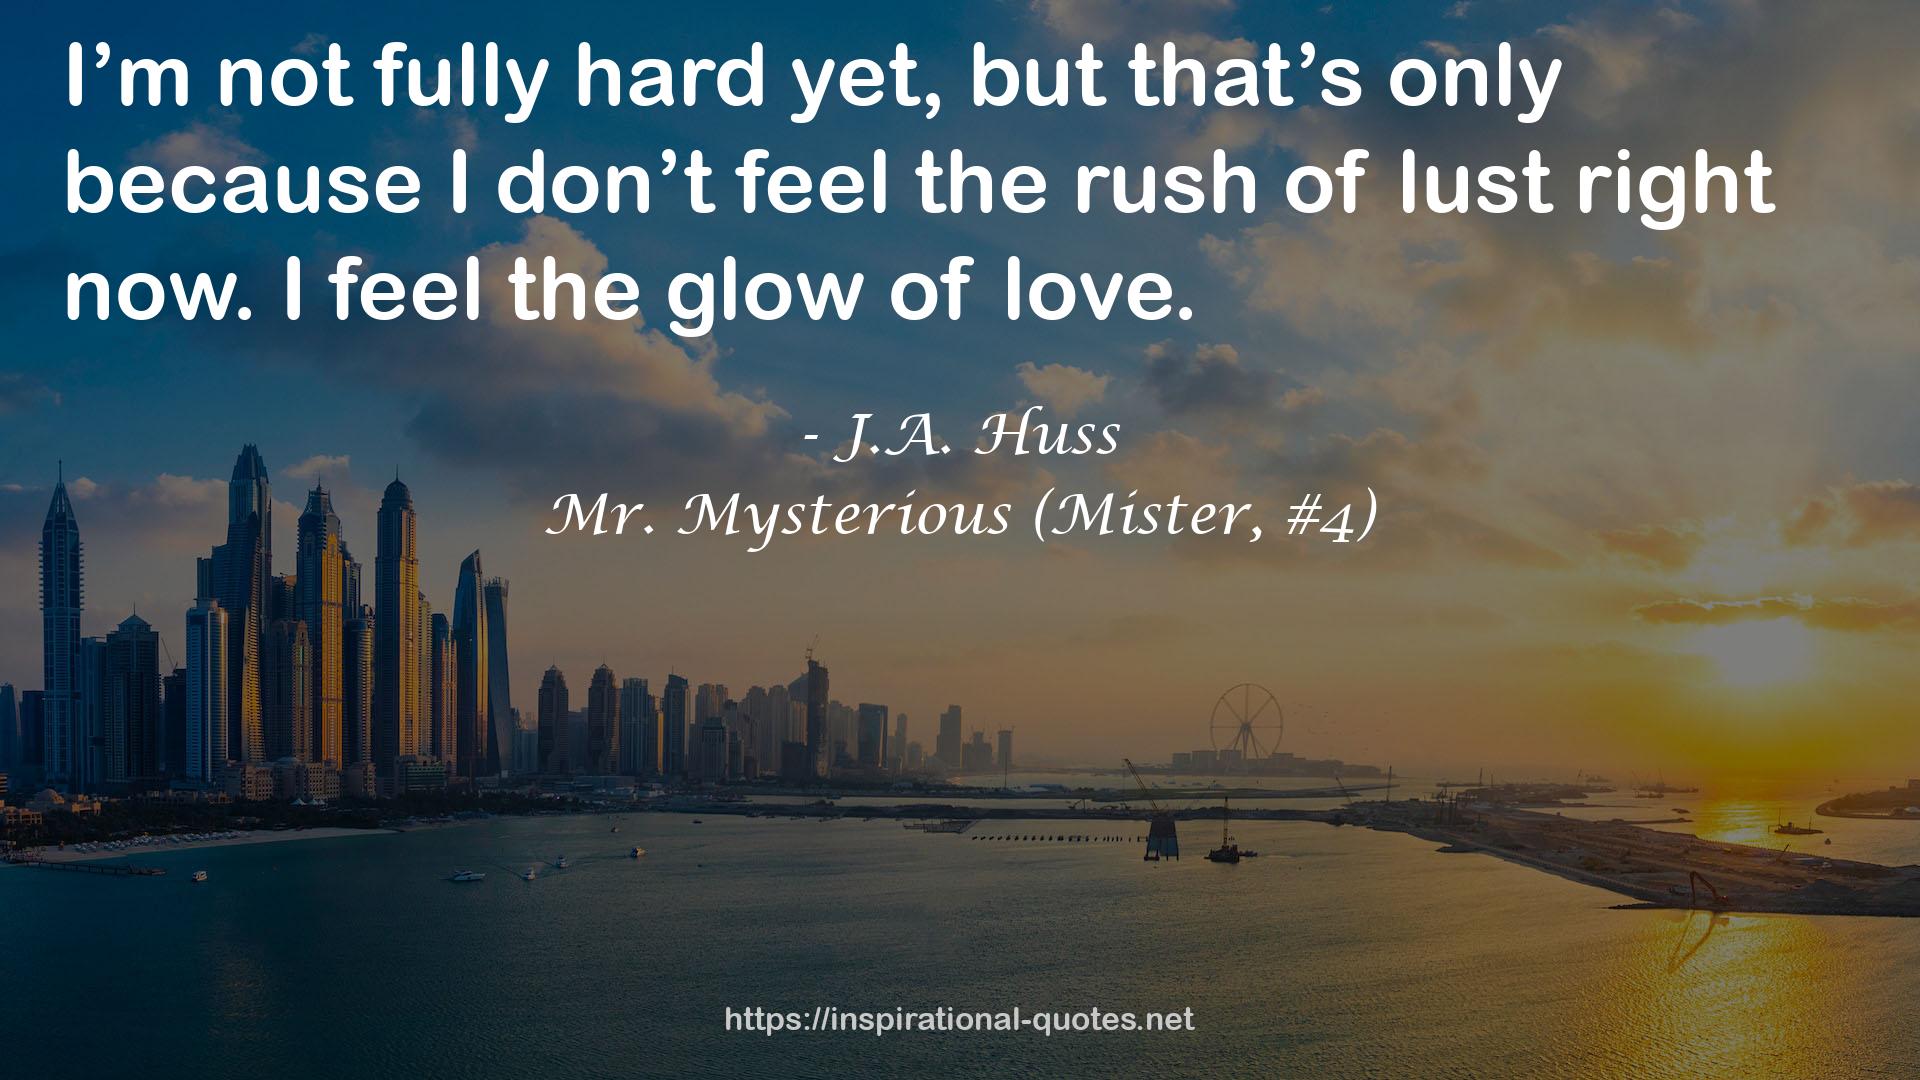 Mr. Mysterious (Mister, #4) QUOTES